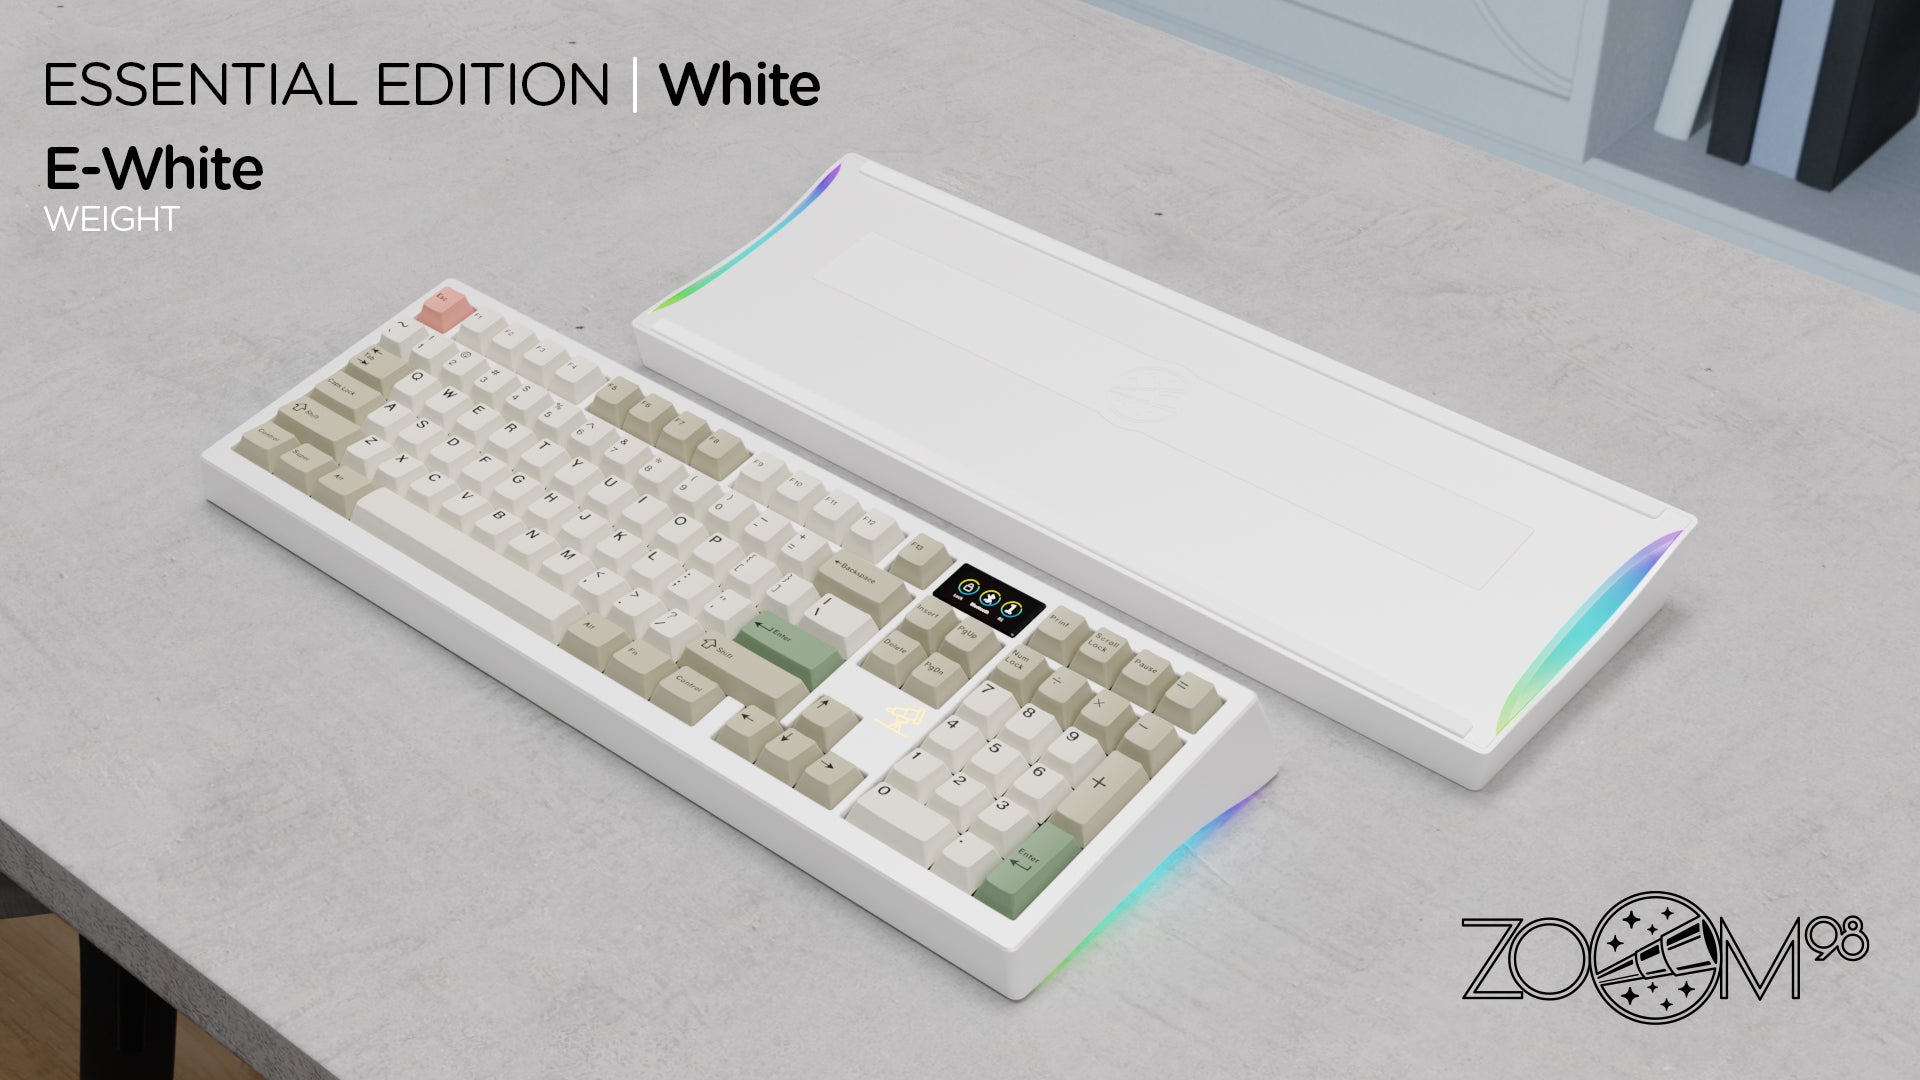 Zoom98 EE White